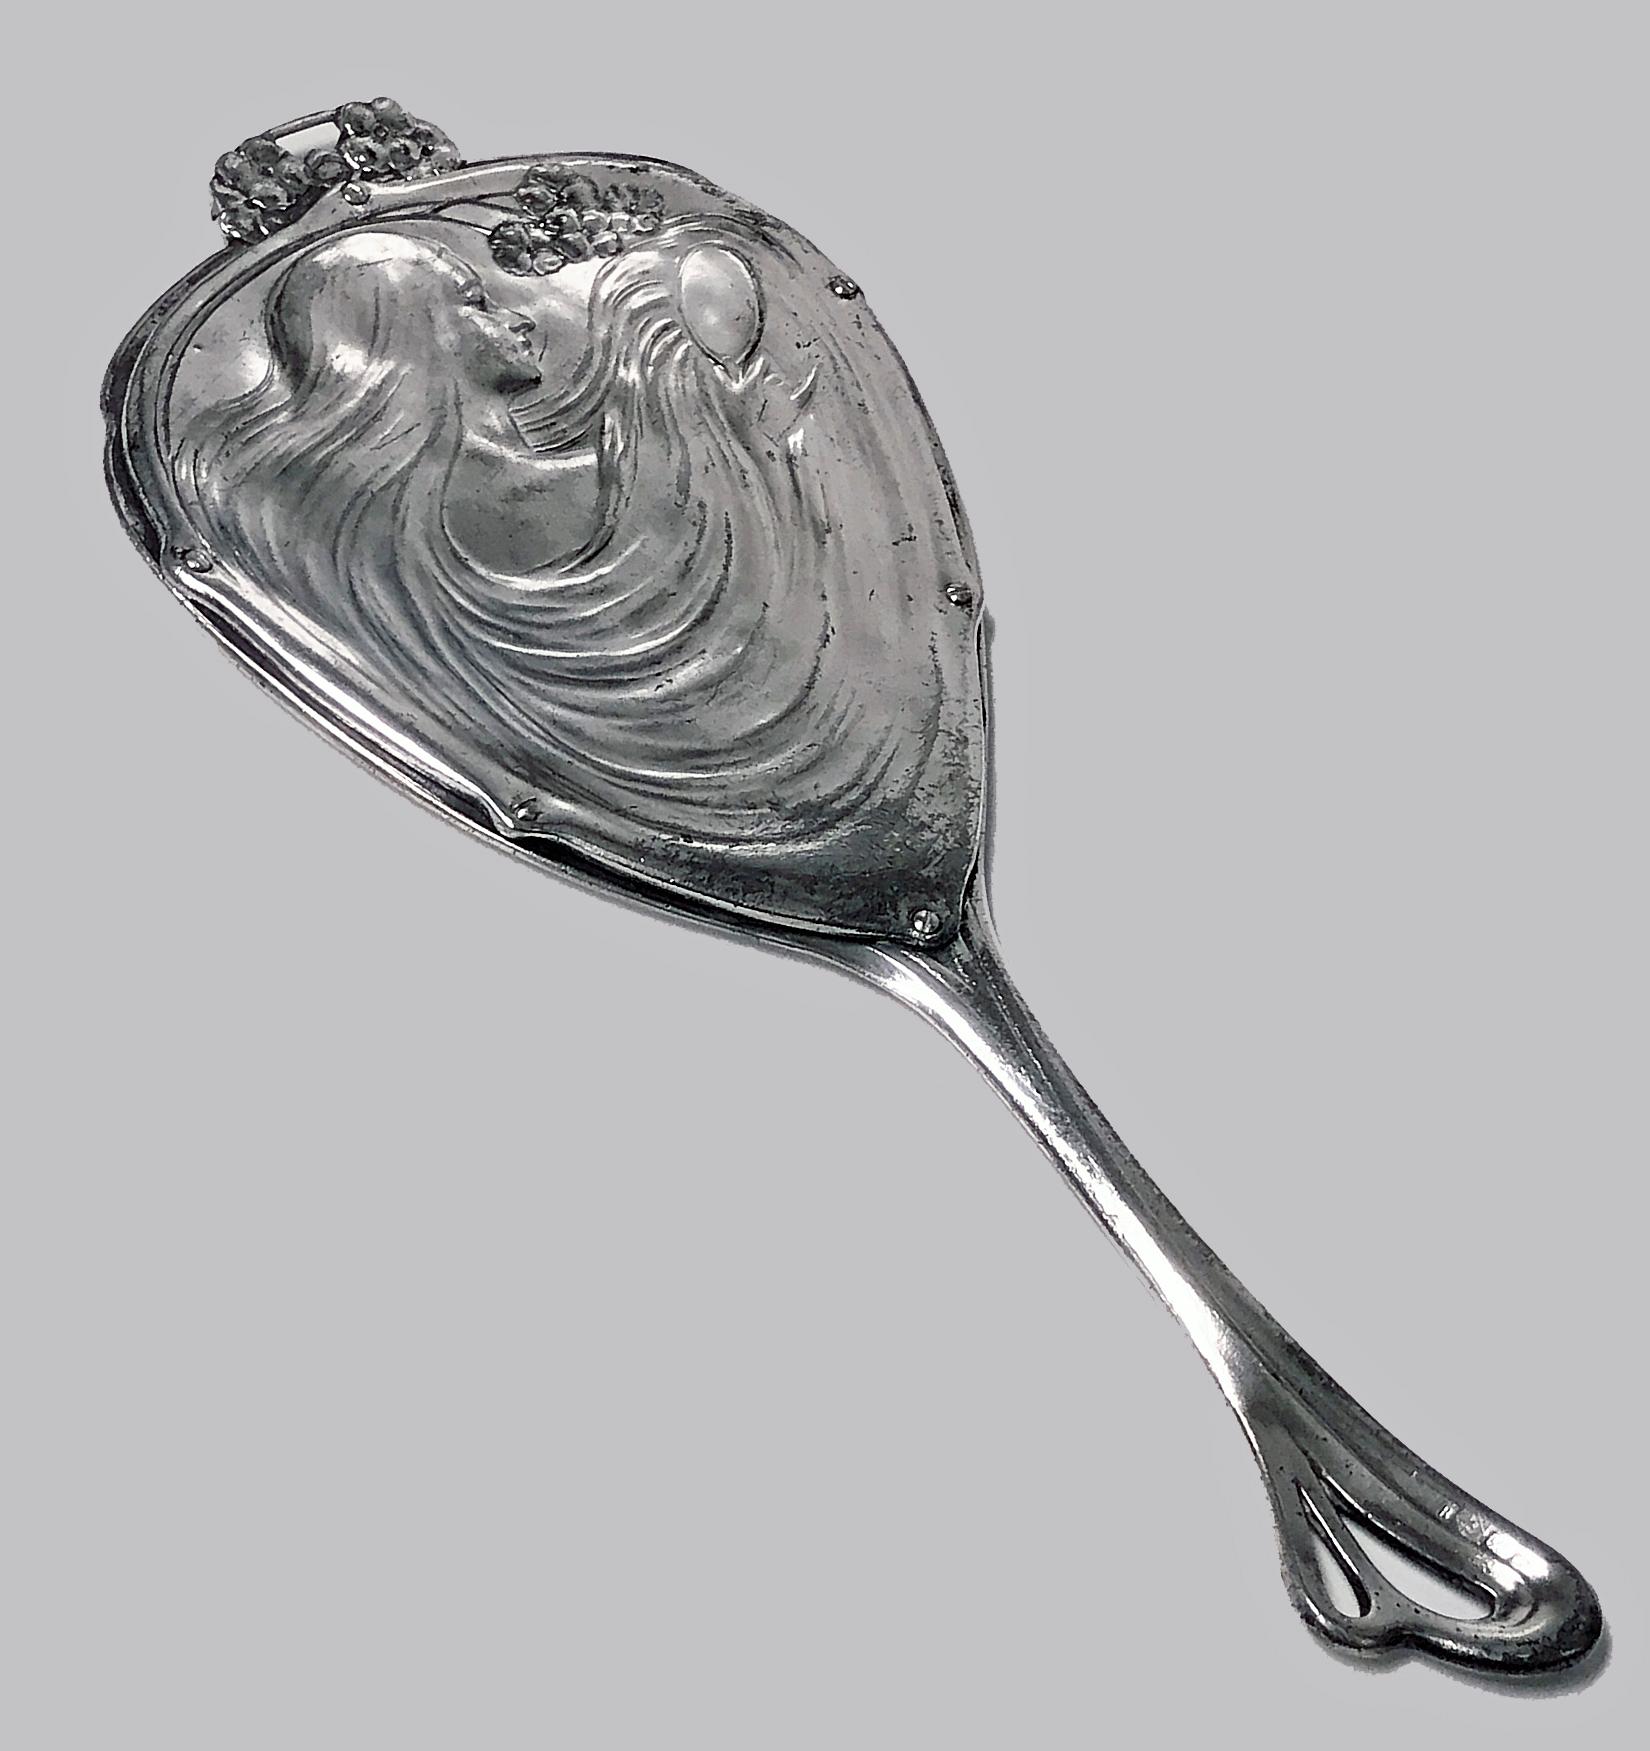 WMF Art Nouveau Jugendstil Silver Plate Hand Mirror, Germany C.1906. Wonderful Maiden flowing hair design to reverse, stylised foliate tendril surround to border of front mirror. Full WMF marks. Ref: Page 291 No 31 WMF 1906 Catalogue. Measures: 12 x